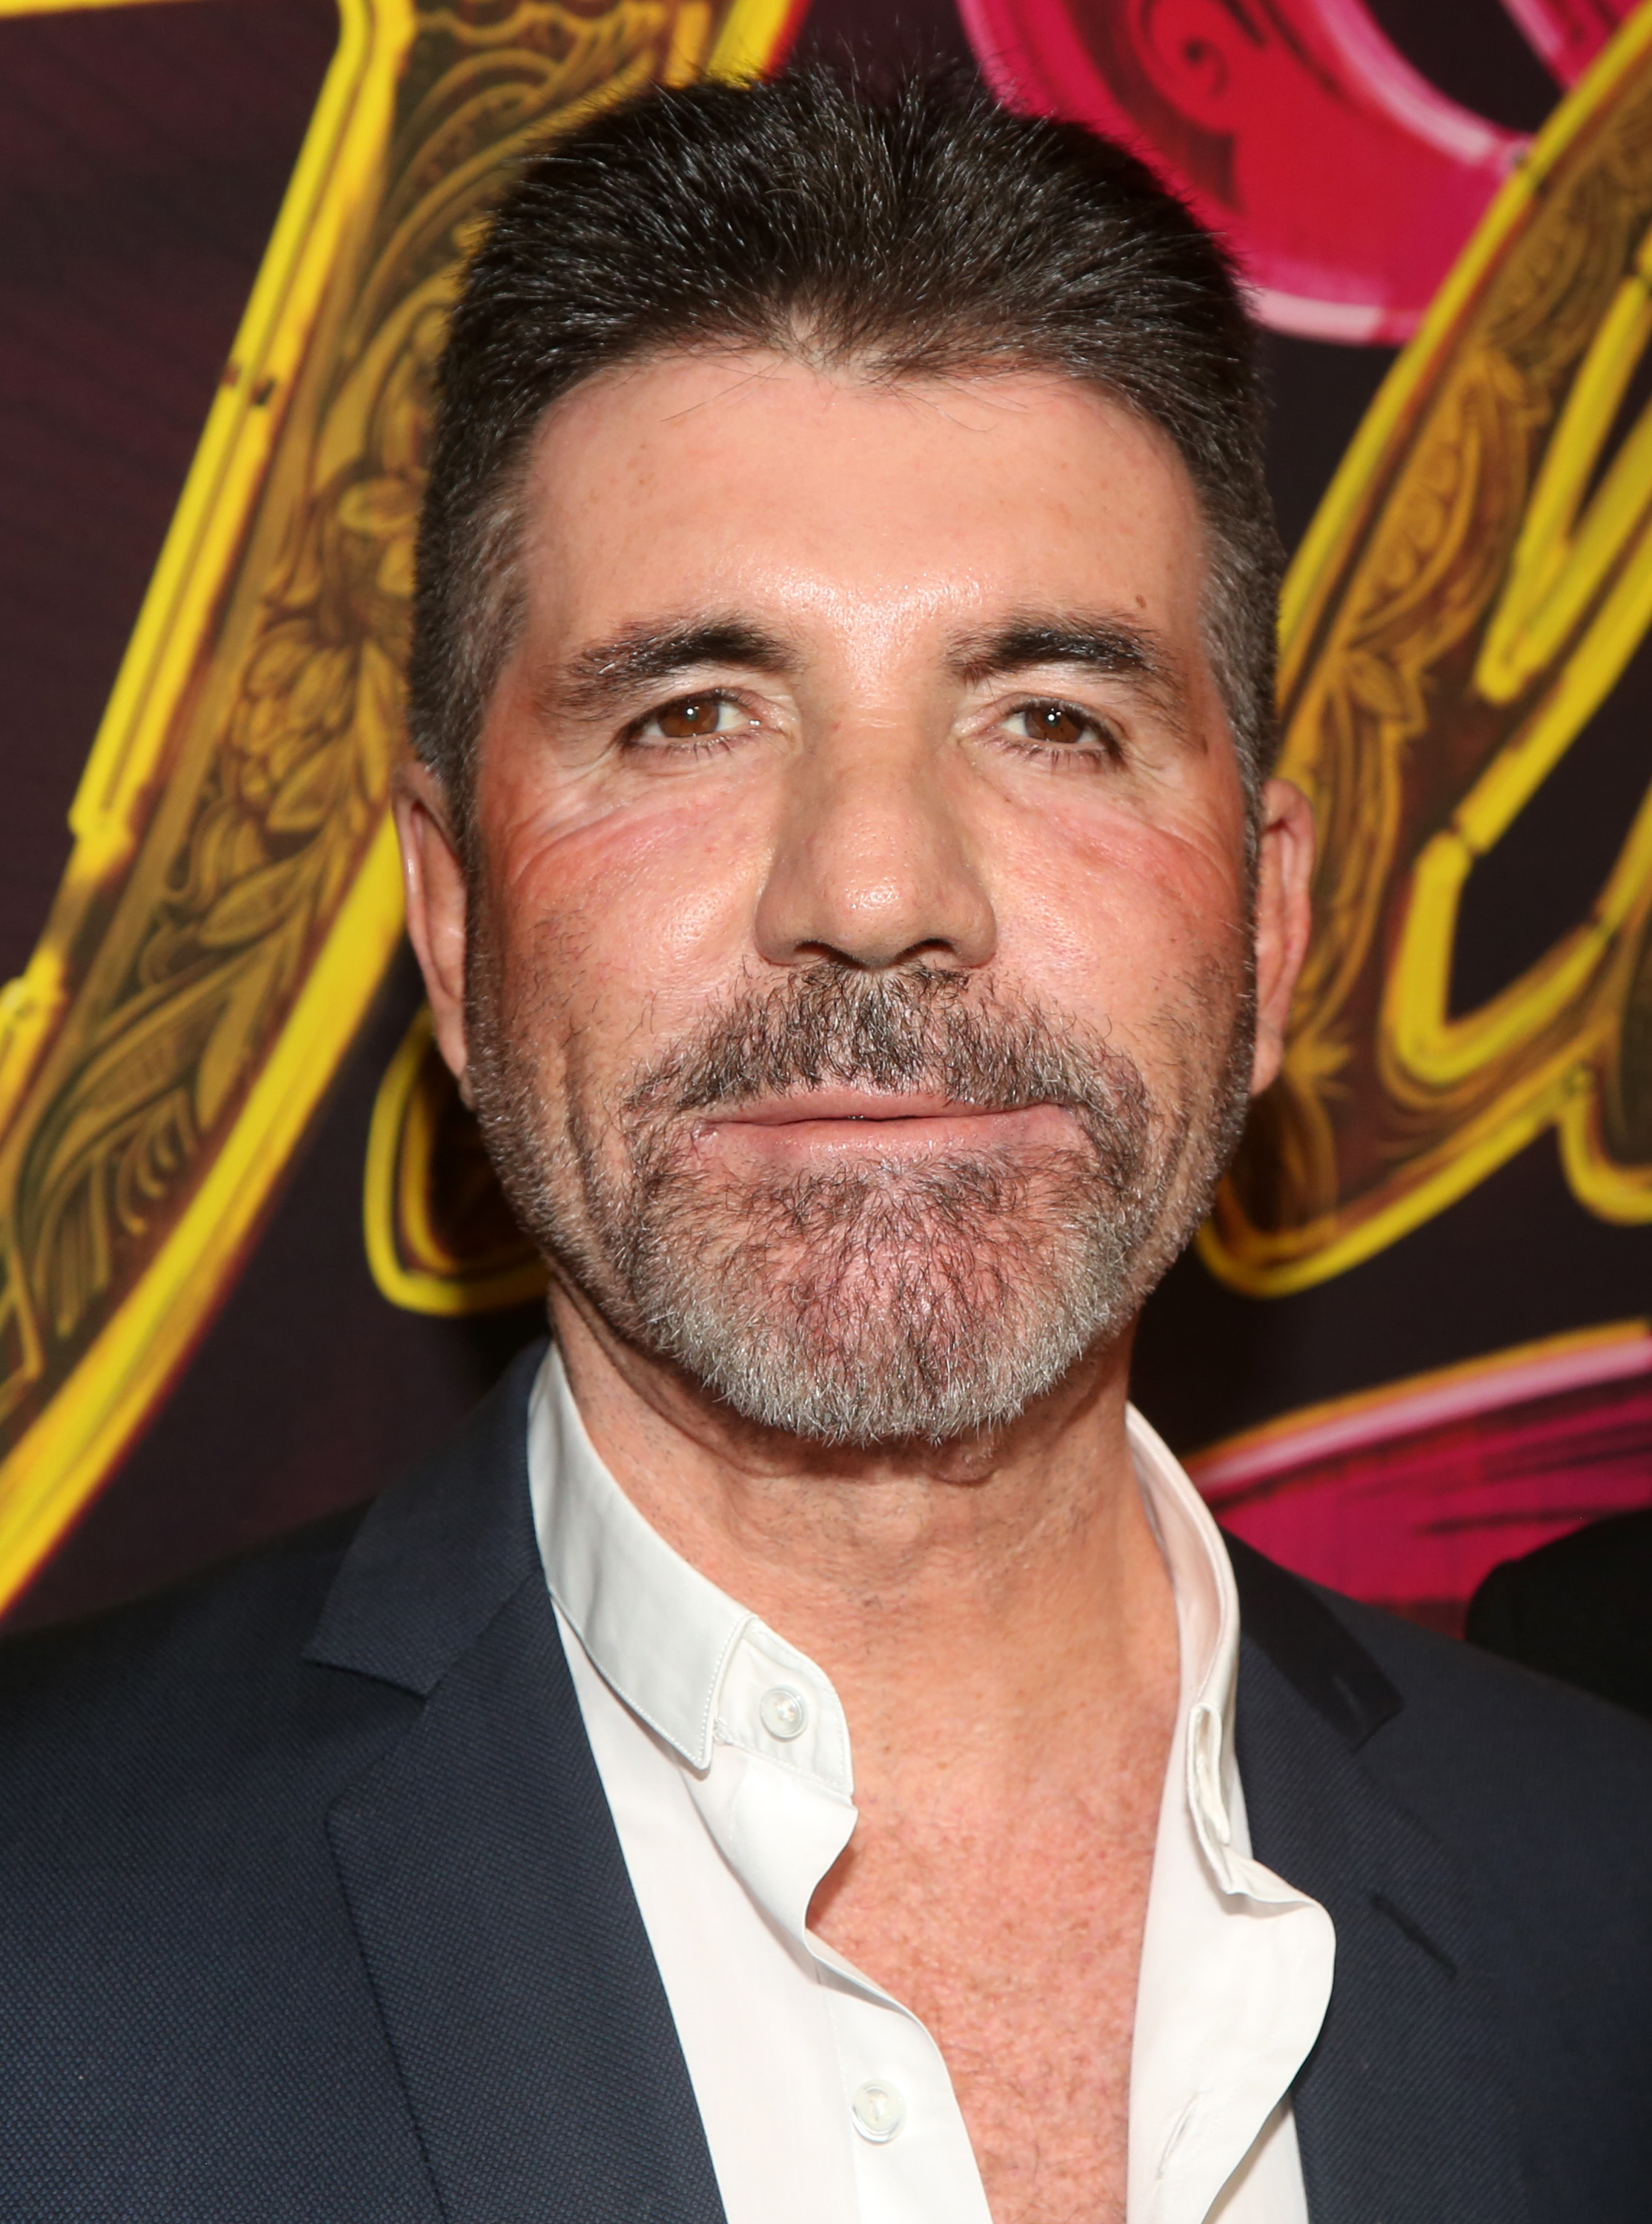 Simon Cowell poses at the opening night of the new musical "& Juliet" on Broadway at The Stephen Sondheim Theatre, on November 17, 2022, in New York City. | Source: Getty Images